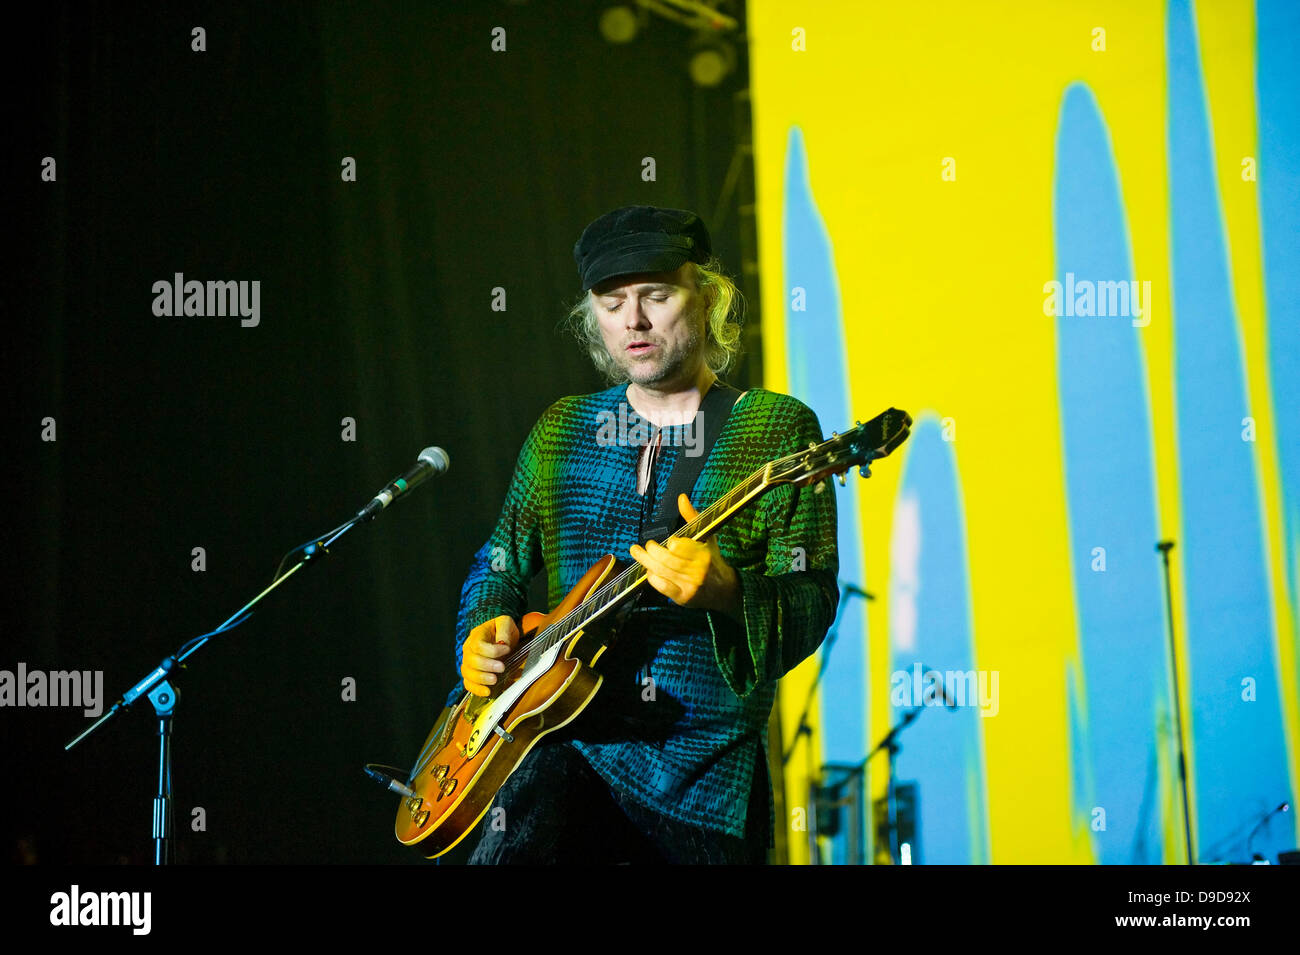 Andrew Innes of Primal Scream performing live at the Brixton Academy London, England - 25.03.11 Stock Photo